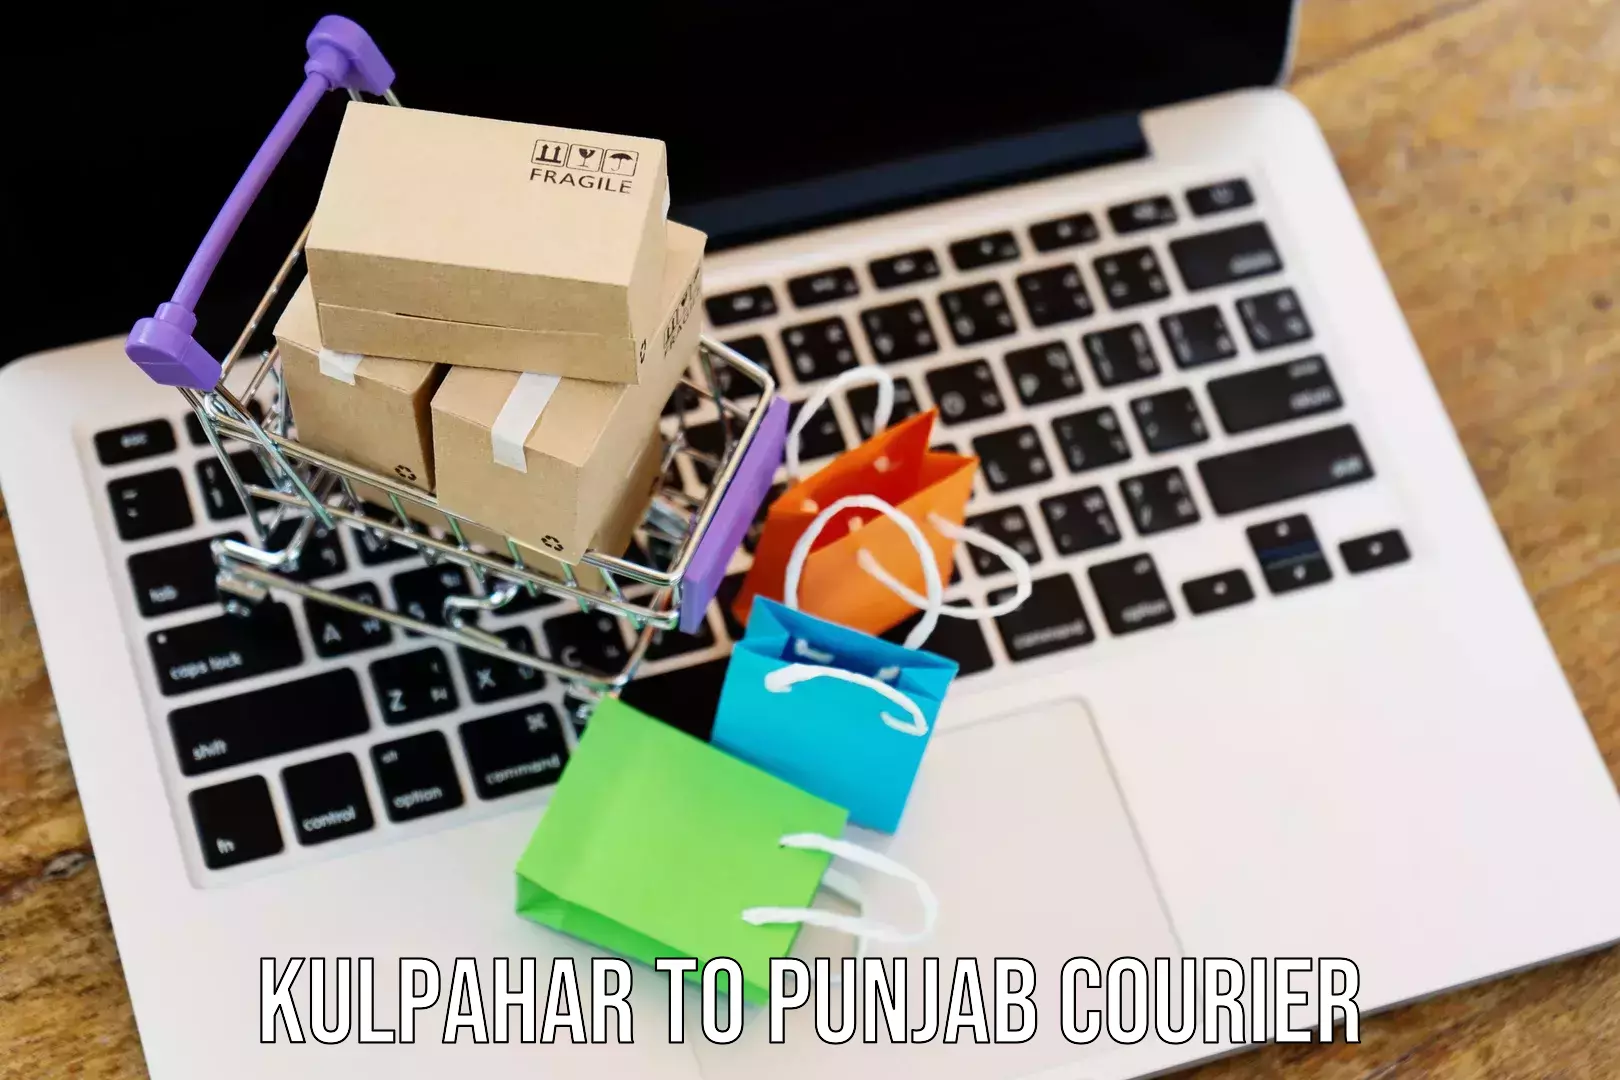 State-of-the-art courier technology Kulpahar to Punjab